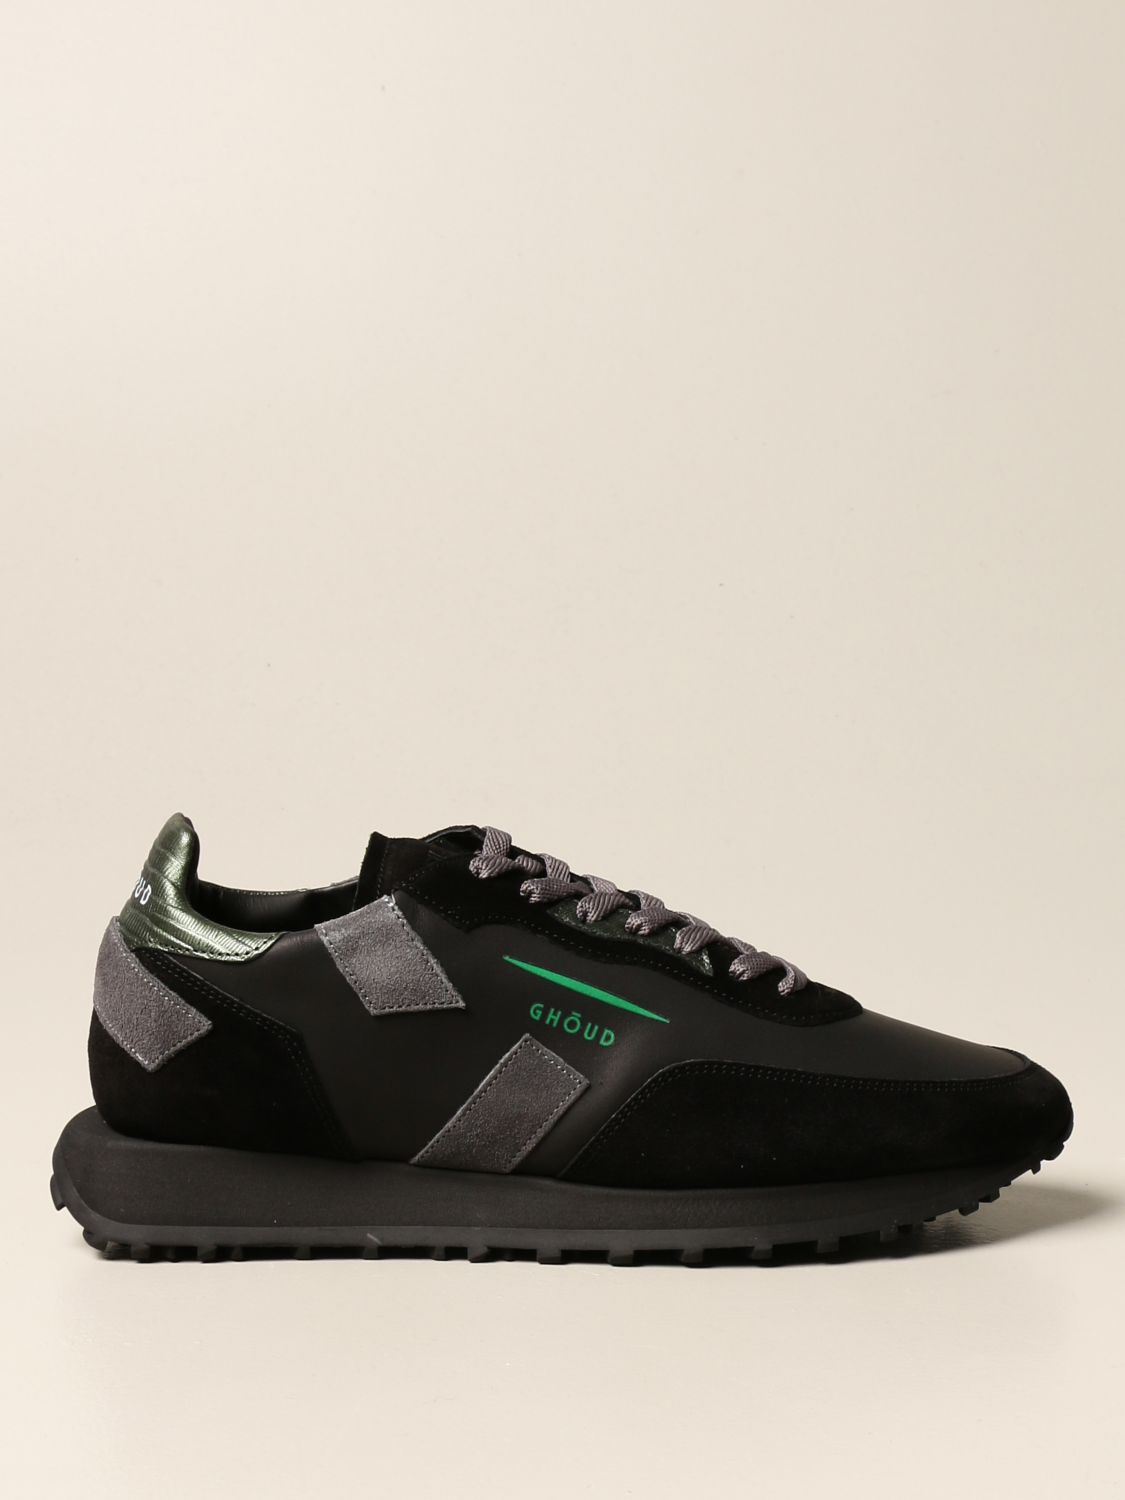 Ghoud Outlet: Rush-One sneakers in leather and suede | Sneakers Ghoud ...